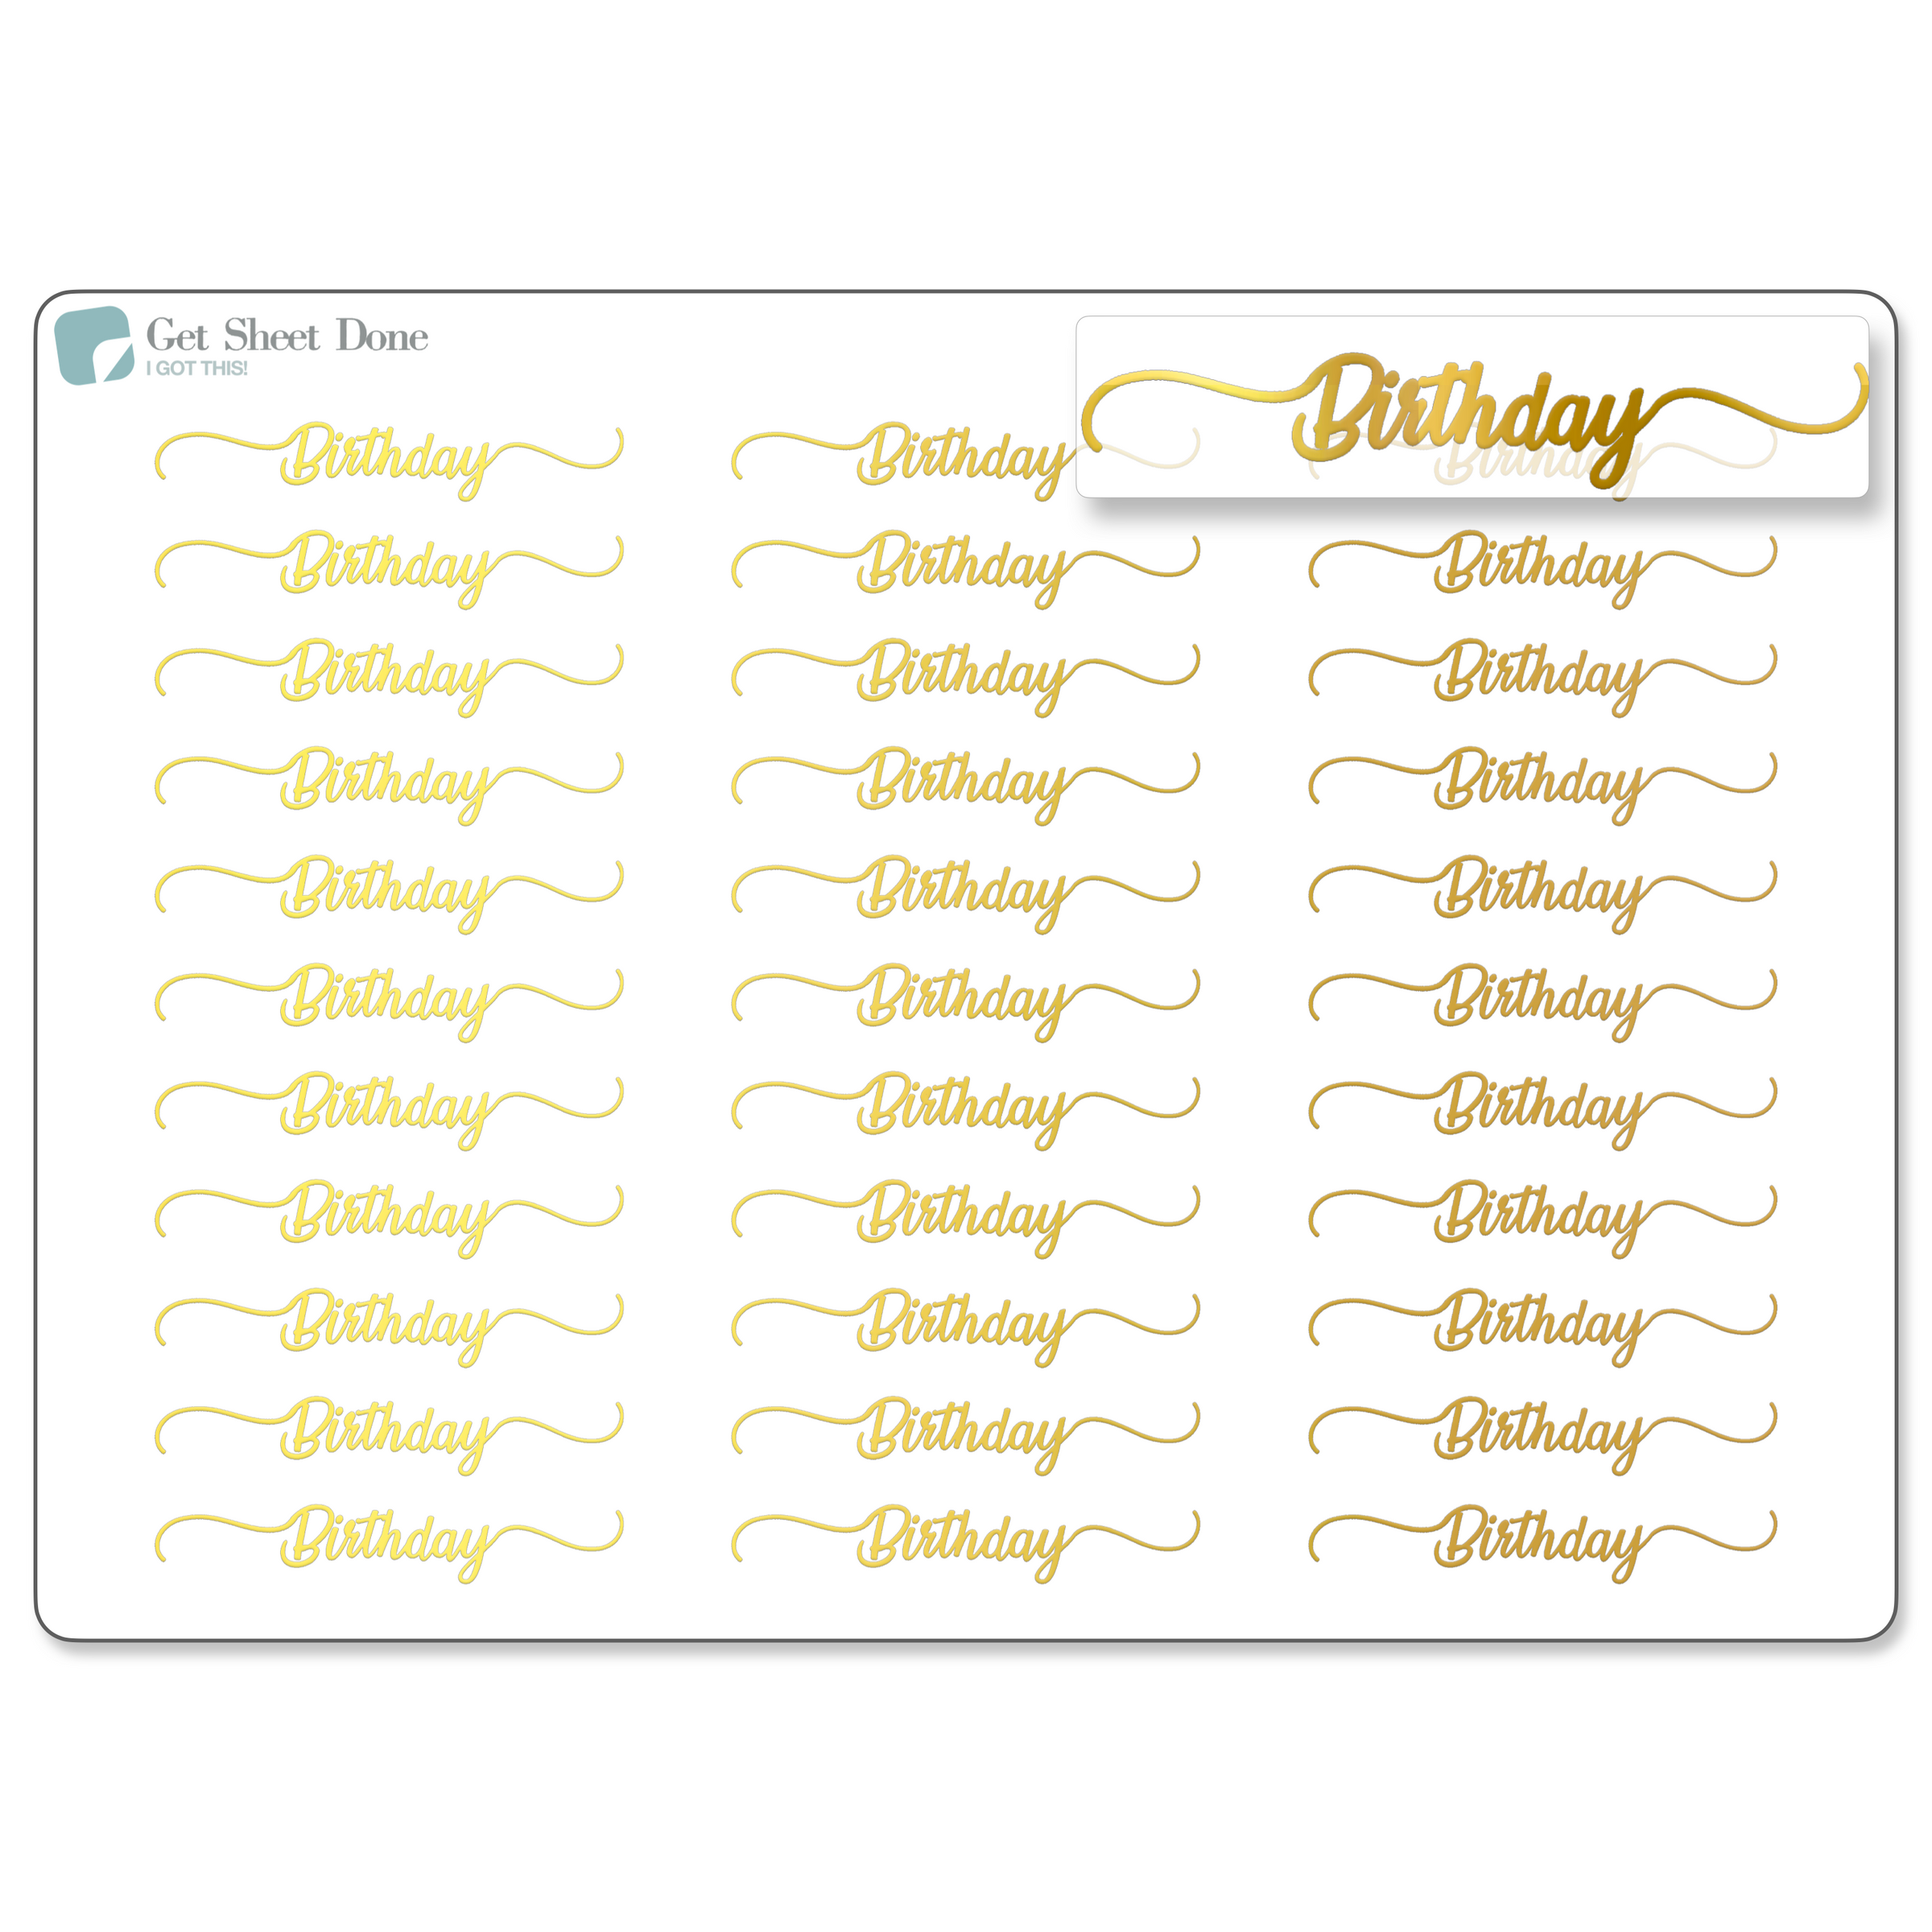 Birthday Foiled Script Planner Stickers / Appointments Reminder Stickers/ DIY Calendar Stickers / Script Text  / Bullet Journaling / Bujo / Essential Productivity Stickers